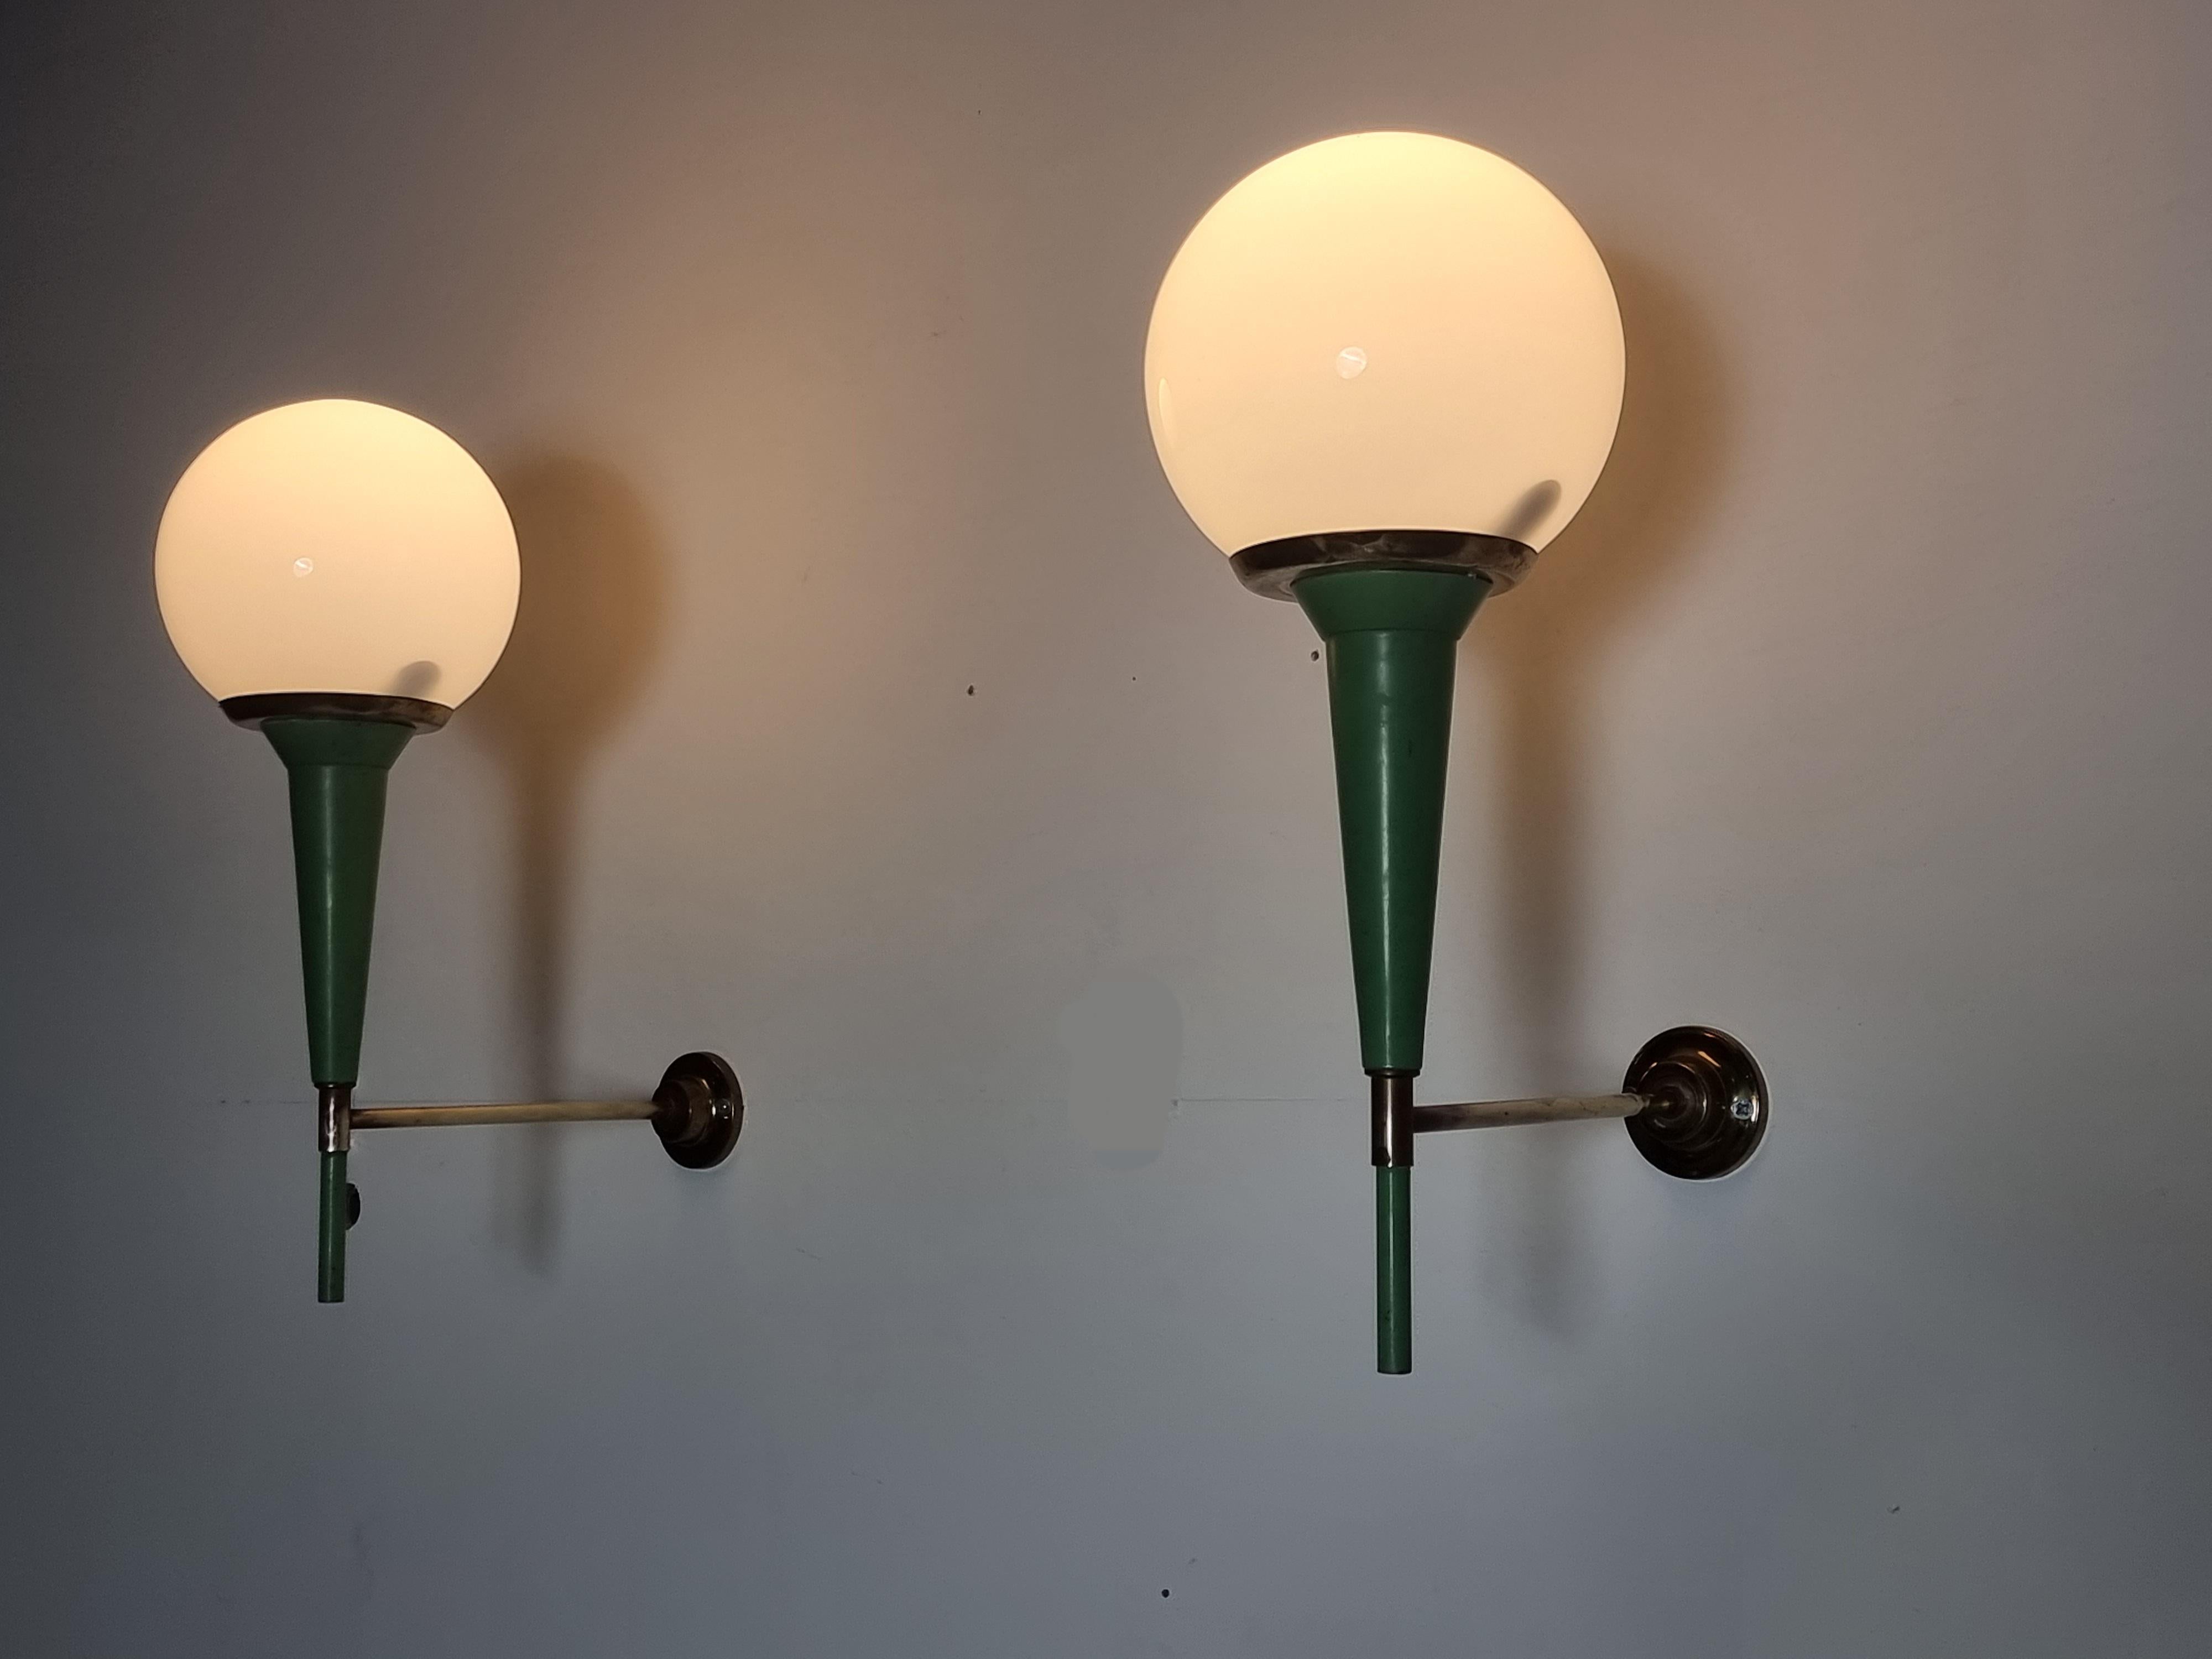 Set of 2 Enamel and Brass Wall Lights/Scones, France, 1950s For Sale 1